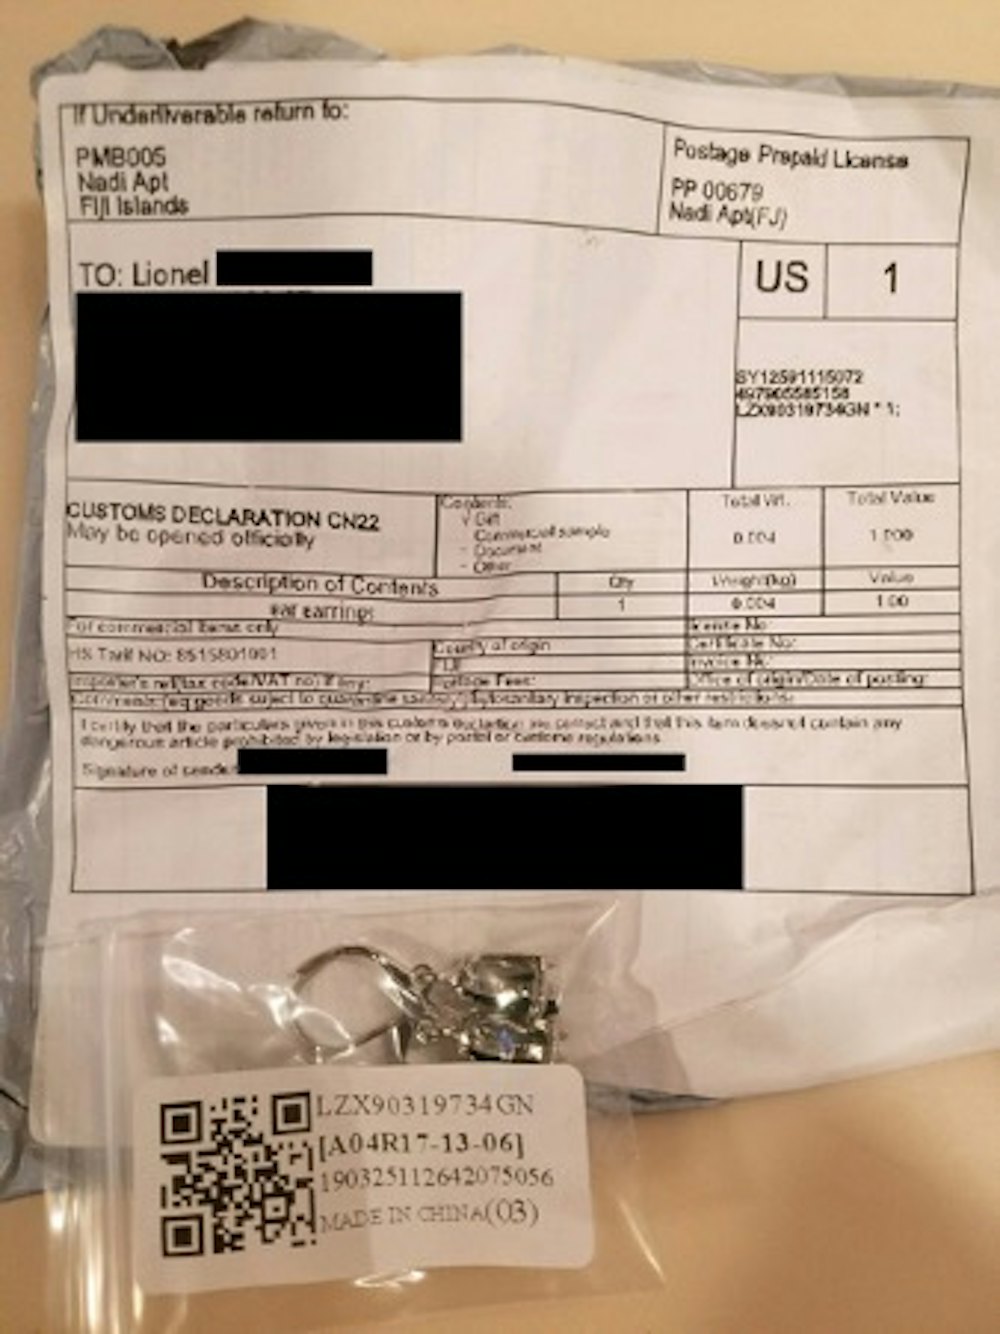 Example of brushing scam shipping label.